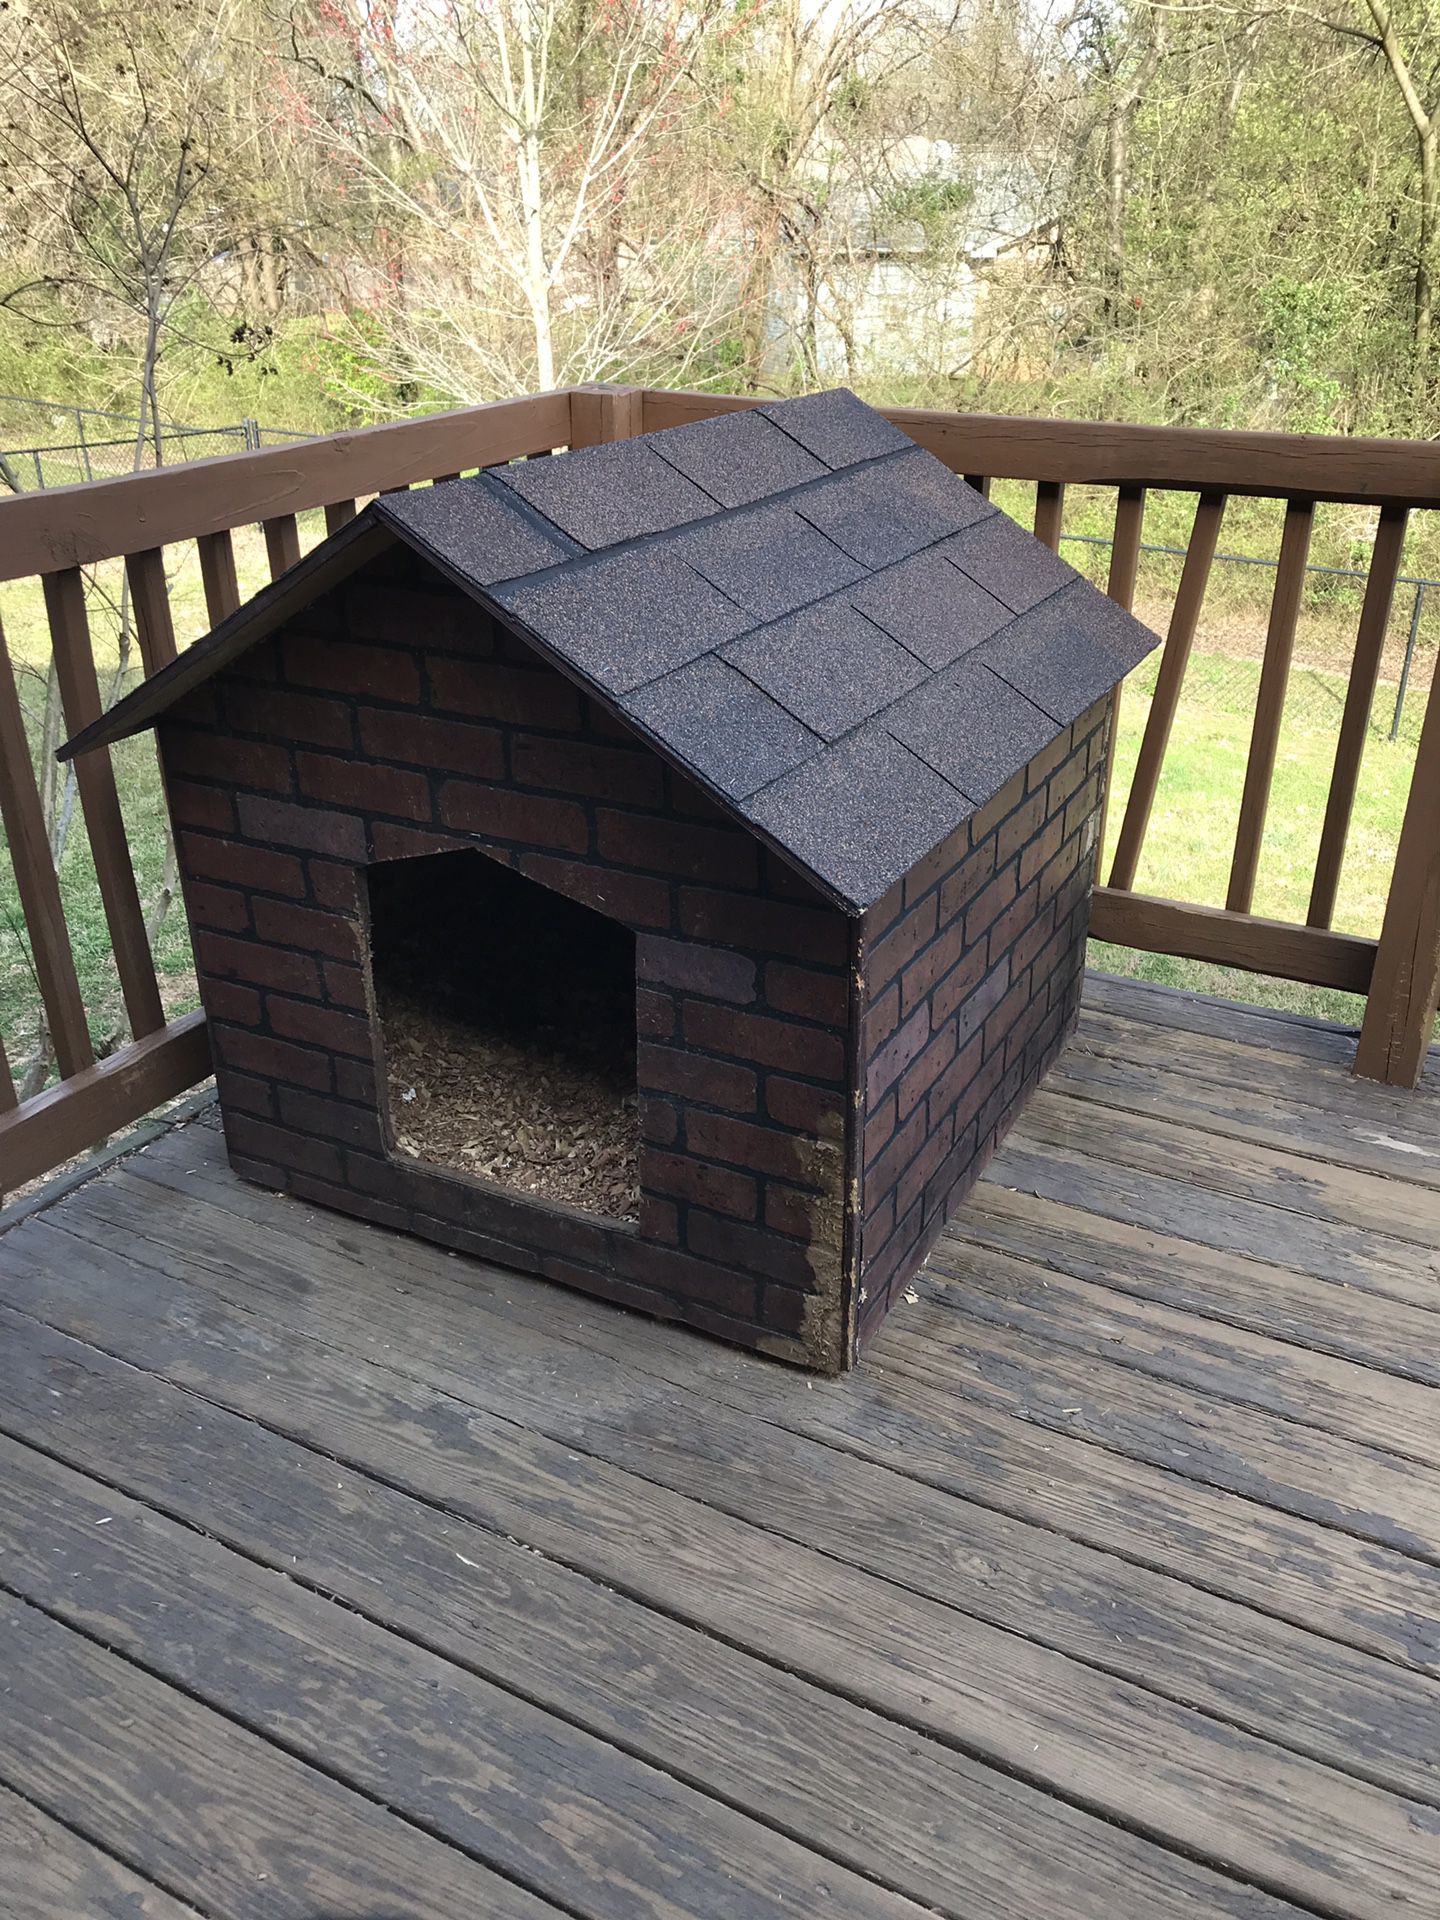 House for dog